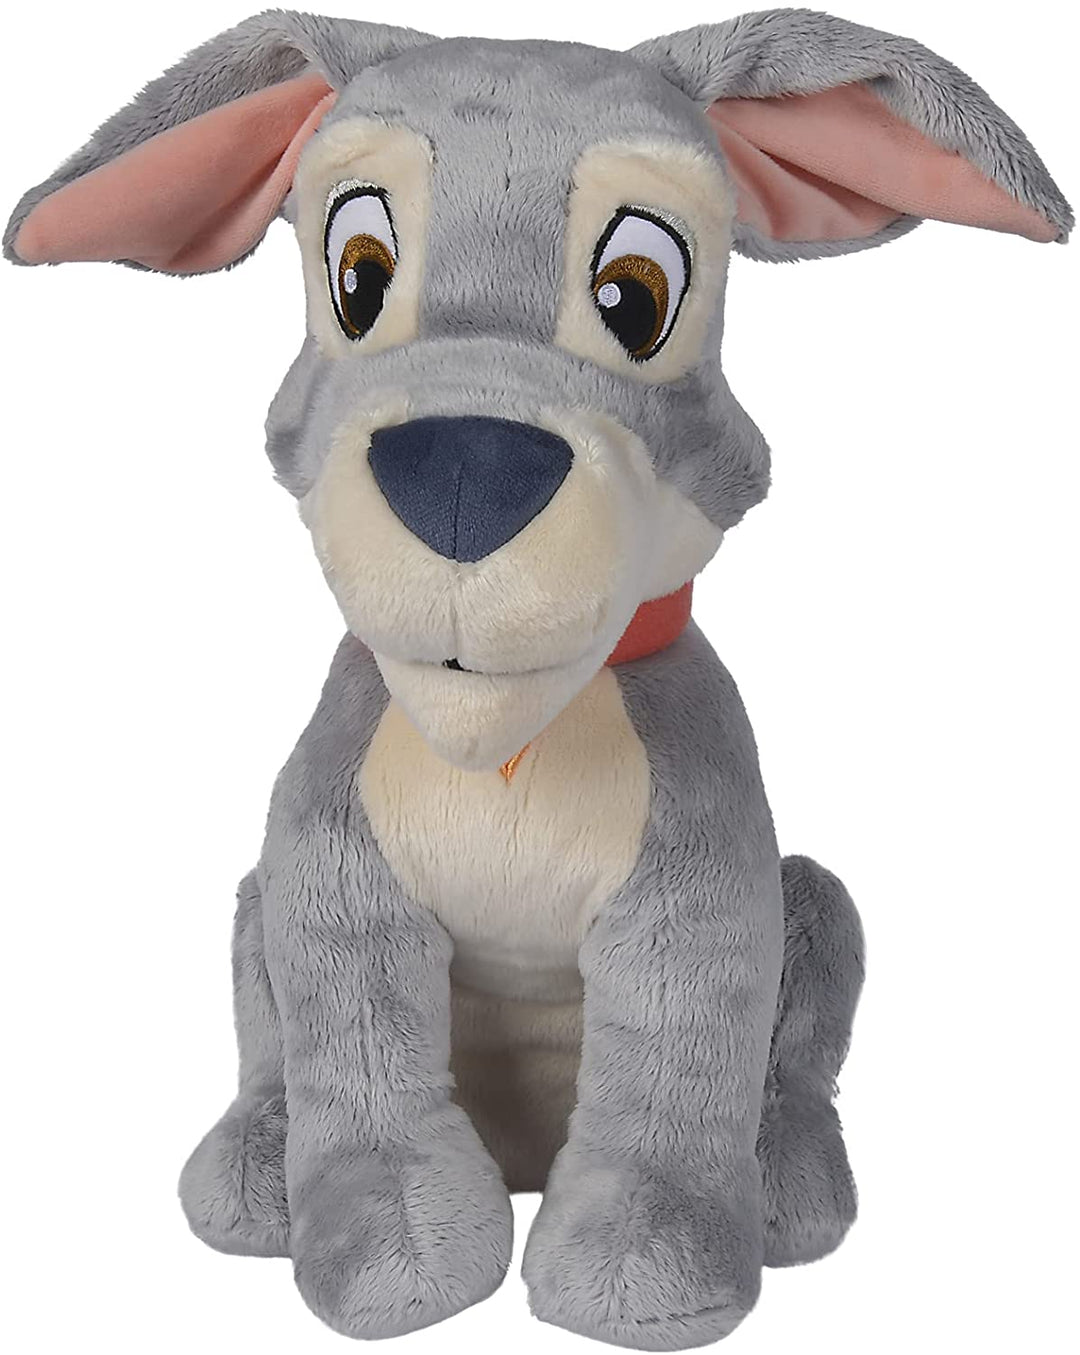 Simba Toys - Plush toy, 35 cm, 100% official Disney license, suitable from the f